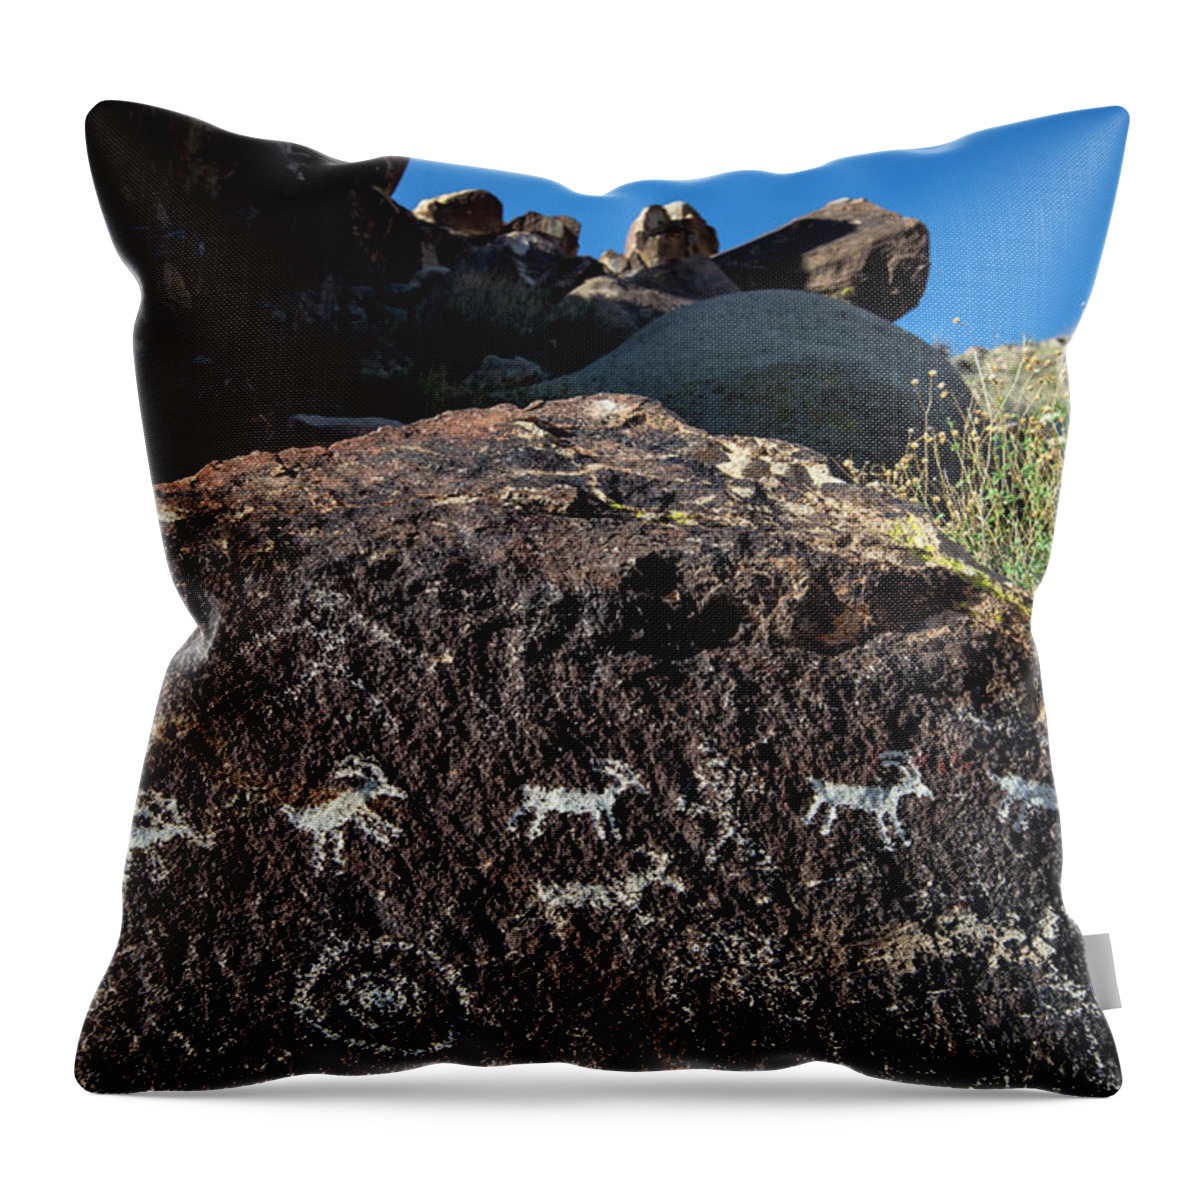 Prehistoric Era Throw Pillow featuring the photograph Prehistoric Rock Art In Grapevine Canyon by Mark Newman